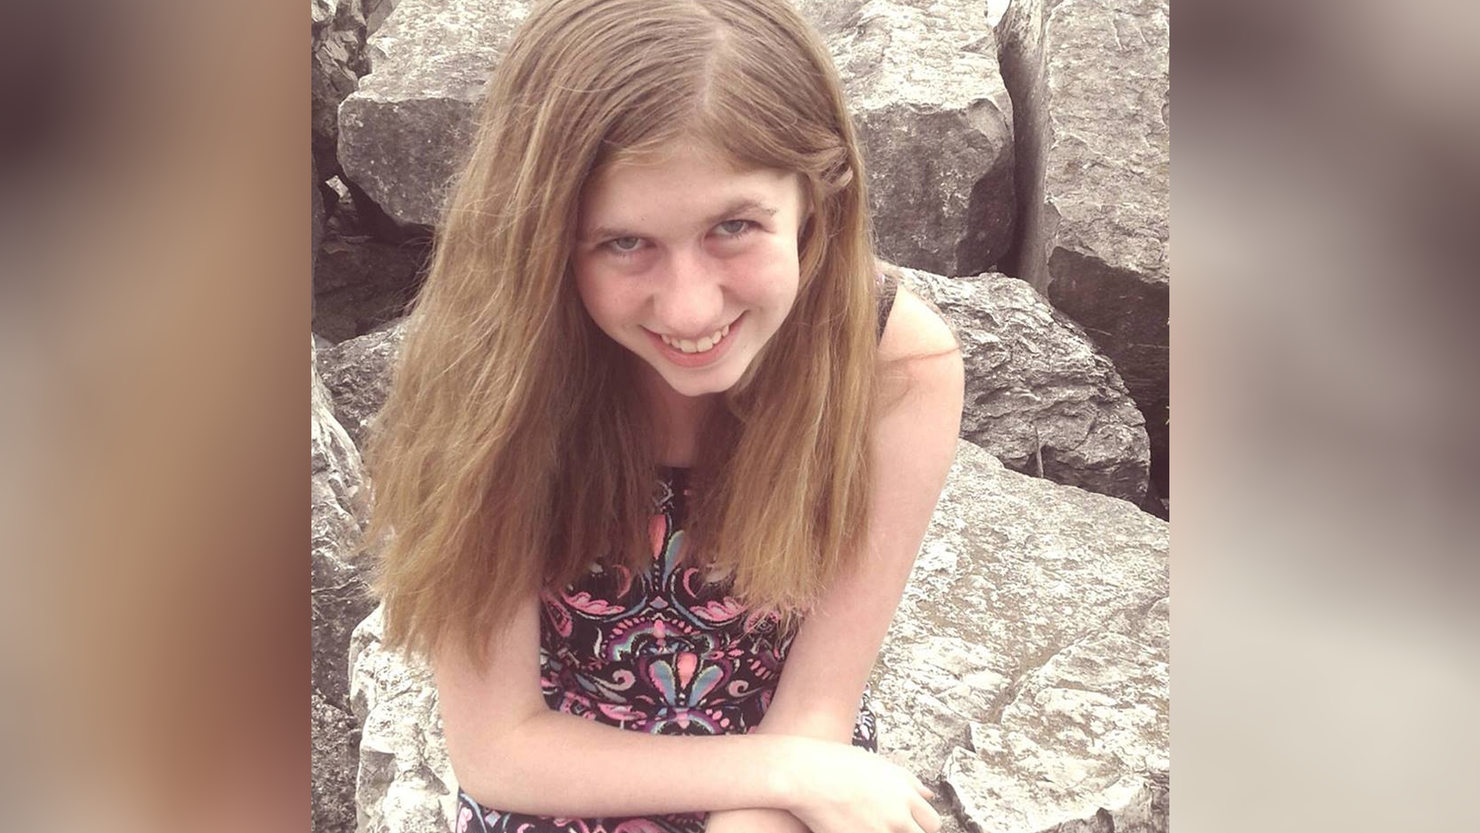 jayme closs found in Wisconsin